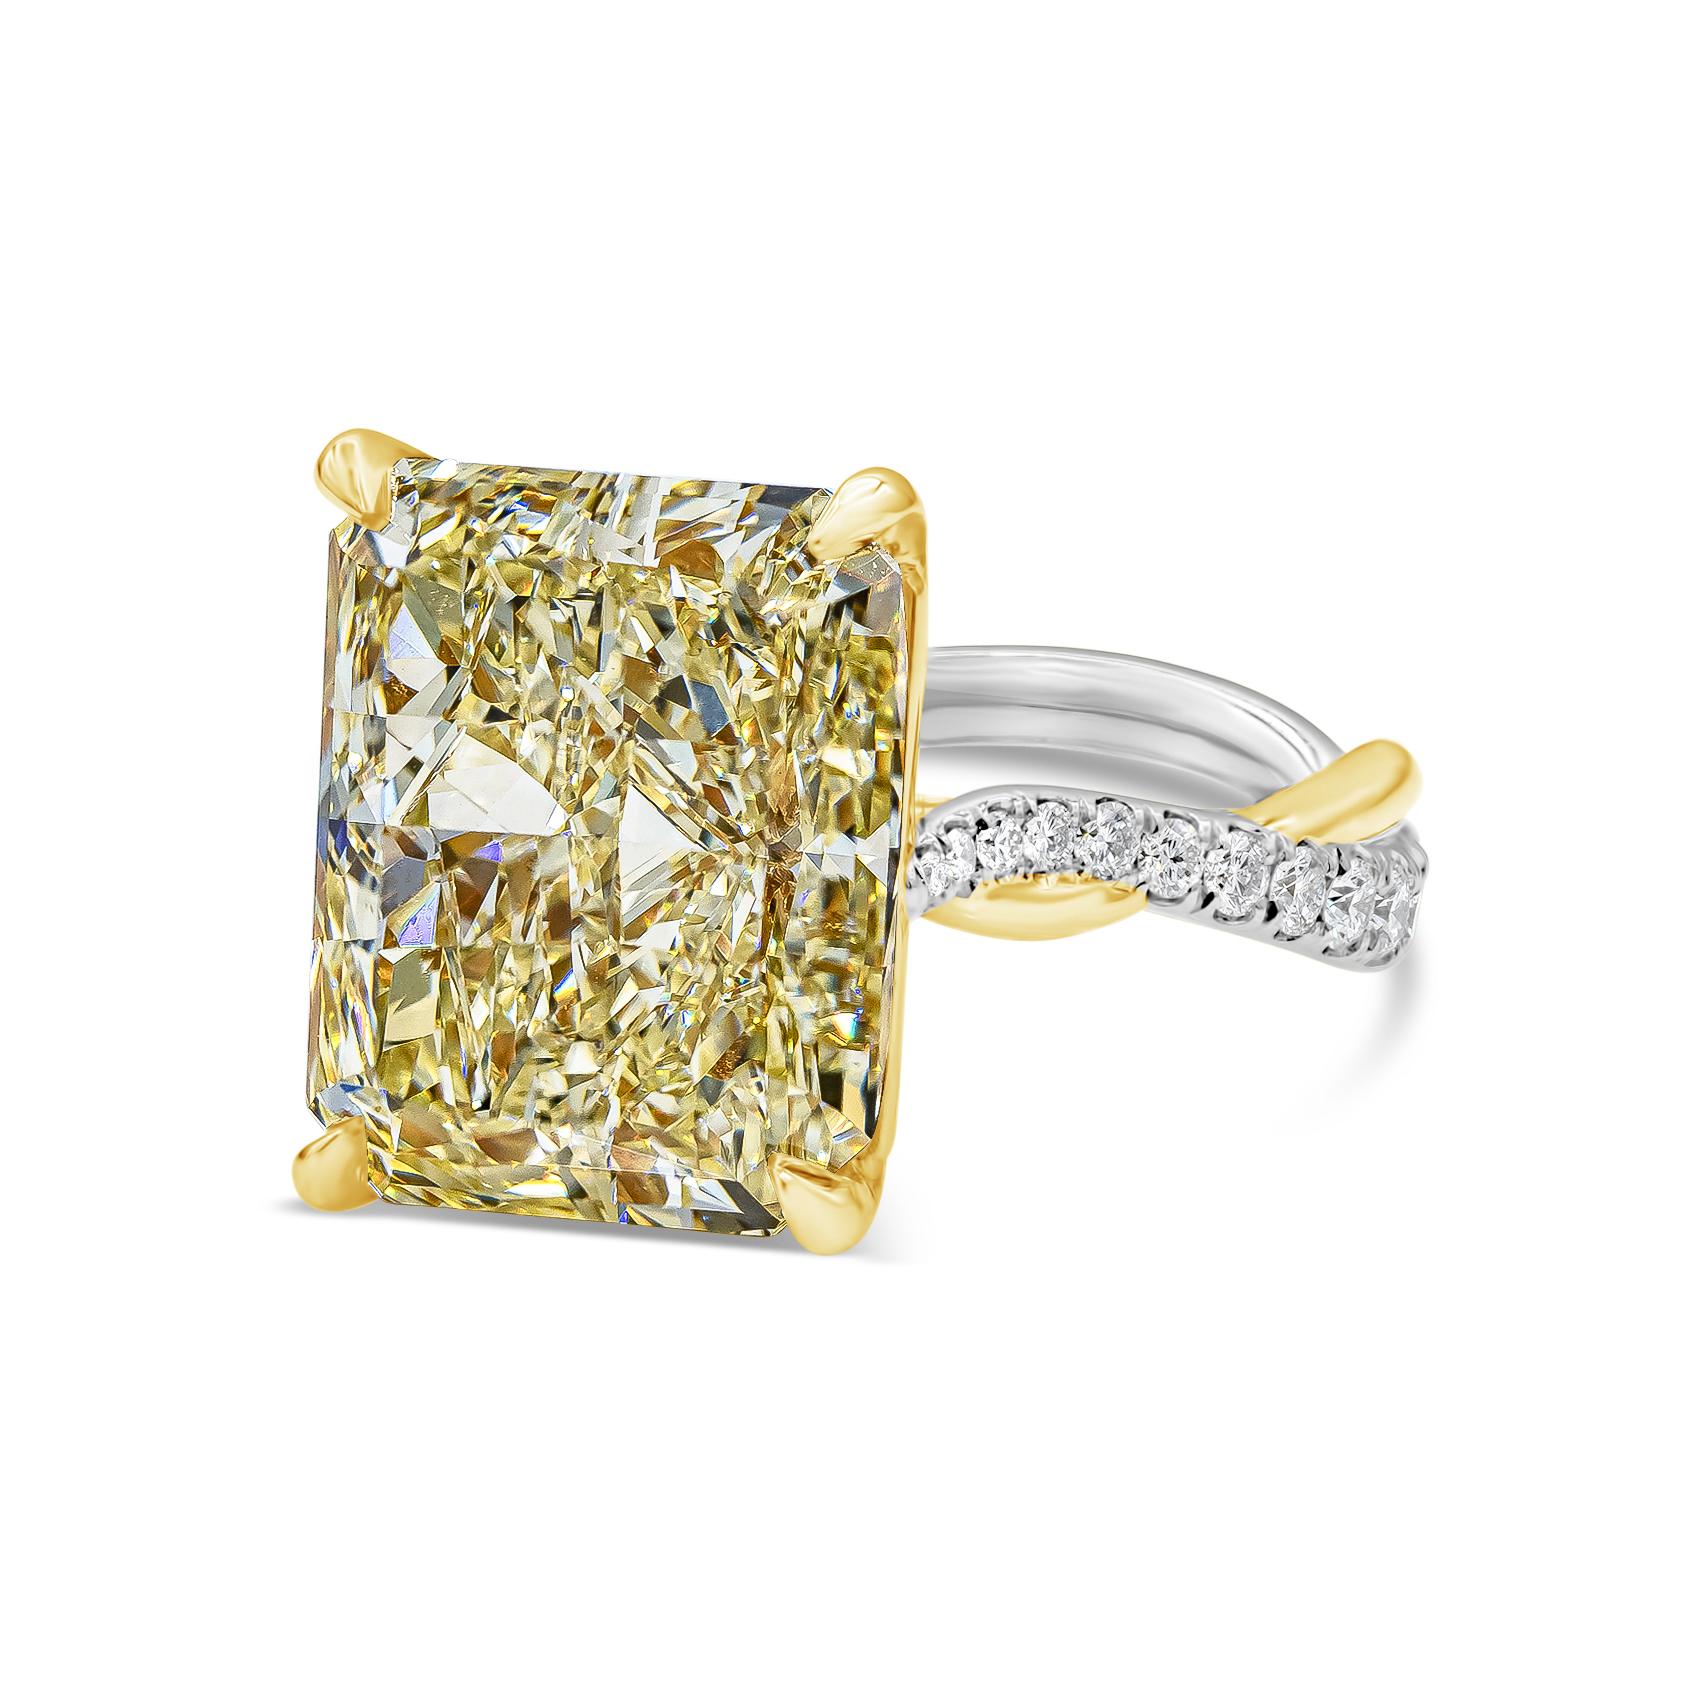 A stylish engagement ring style showcasing a 12.16 carat radiant cut yellow diamond certified by GIA as Fancy Light Yellow, VS1 clarity. The vibrant center diamond is set in a chic intertwined yellow gold and platinum bands accented with diamonds.